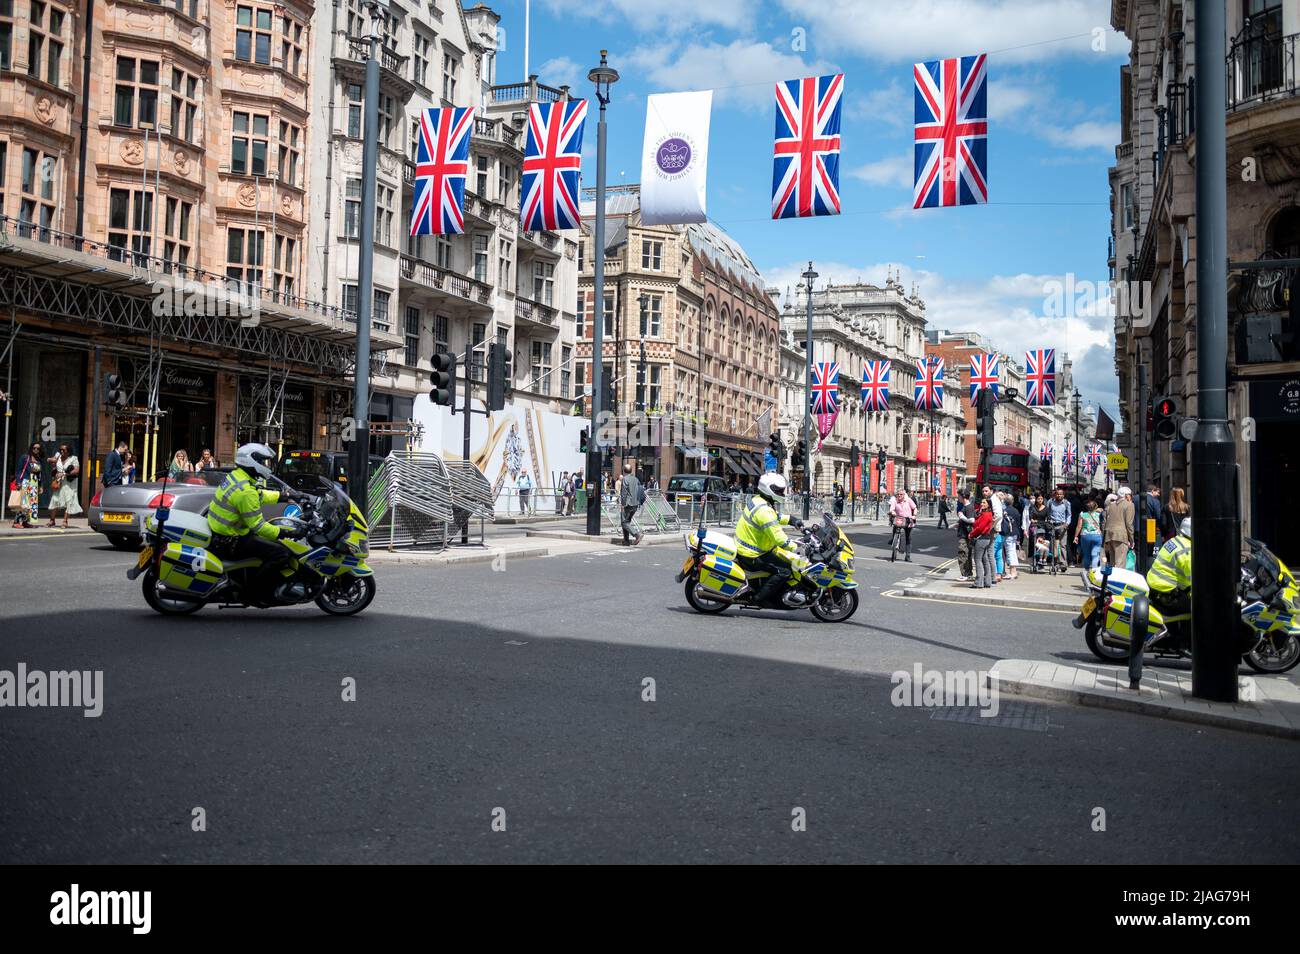 Police motorcycles at London jubilee 2022 with union jack flags above iconic street sunny day Stock Photo